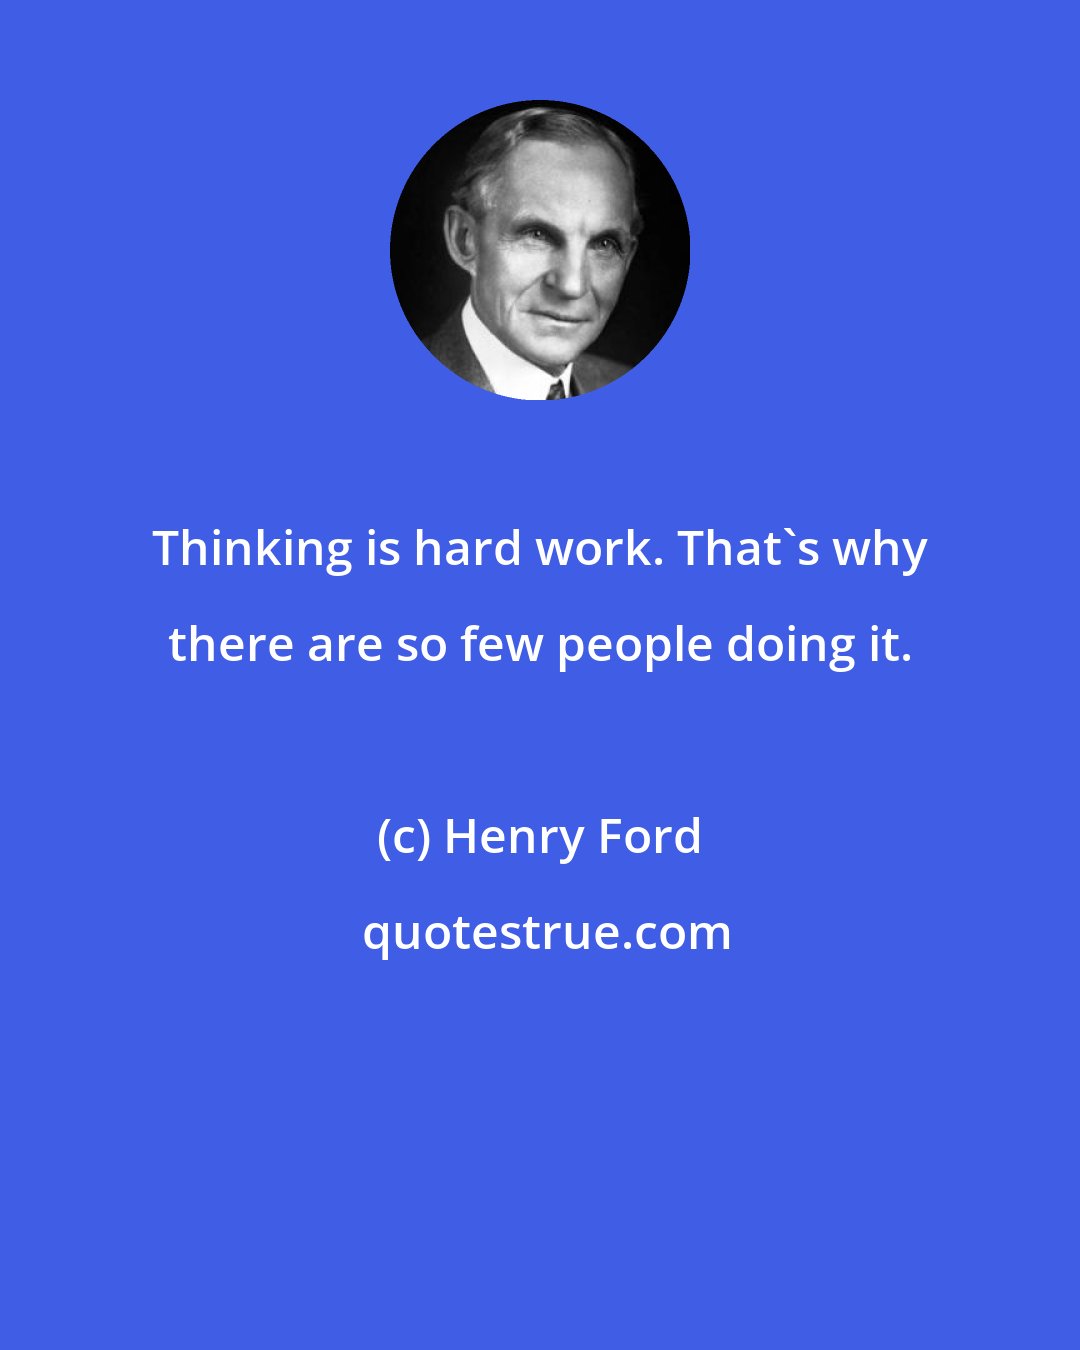 Henry Ford: Thinking is hard work. That's why there are so few people doing it.